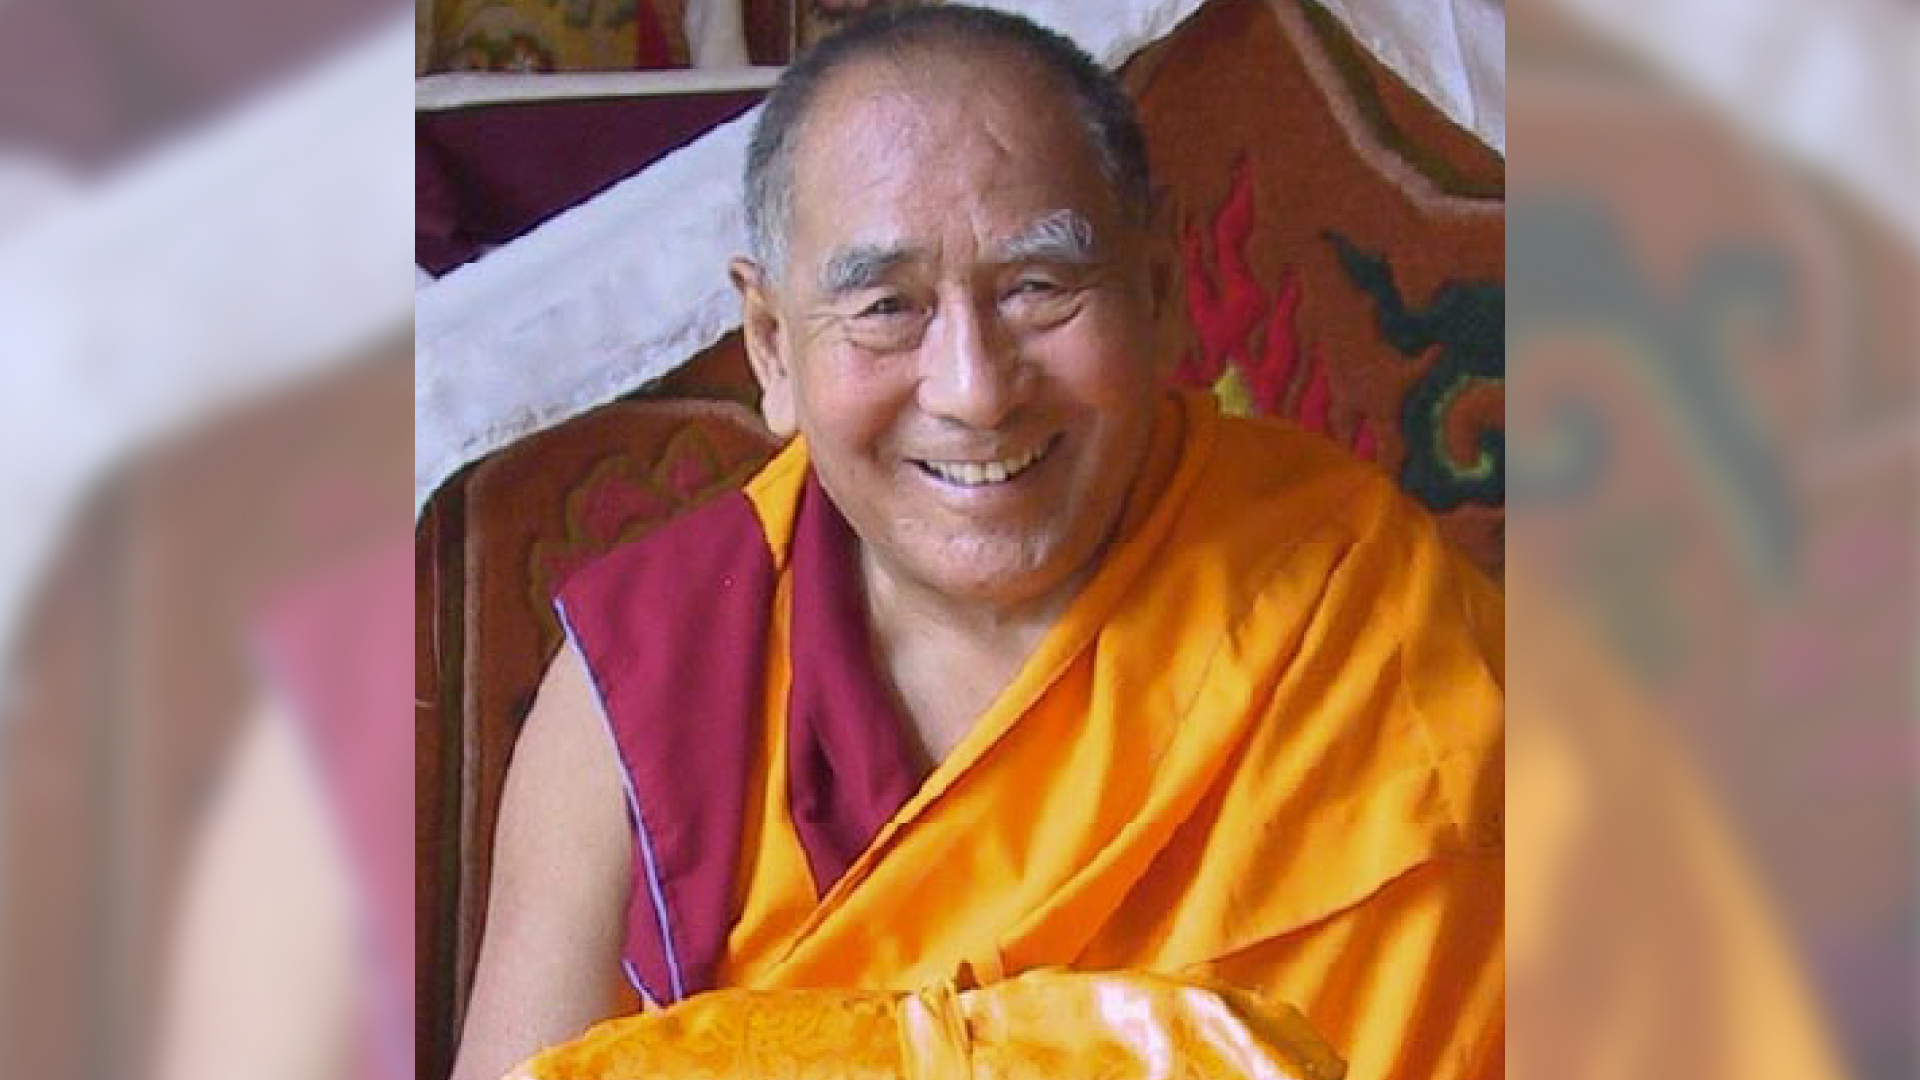 Geshe Lhundub Sopa is seated and smiling.